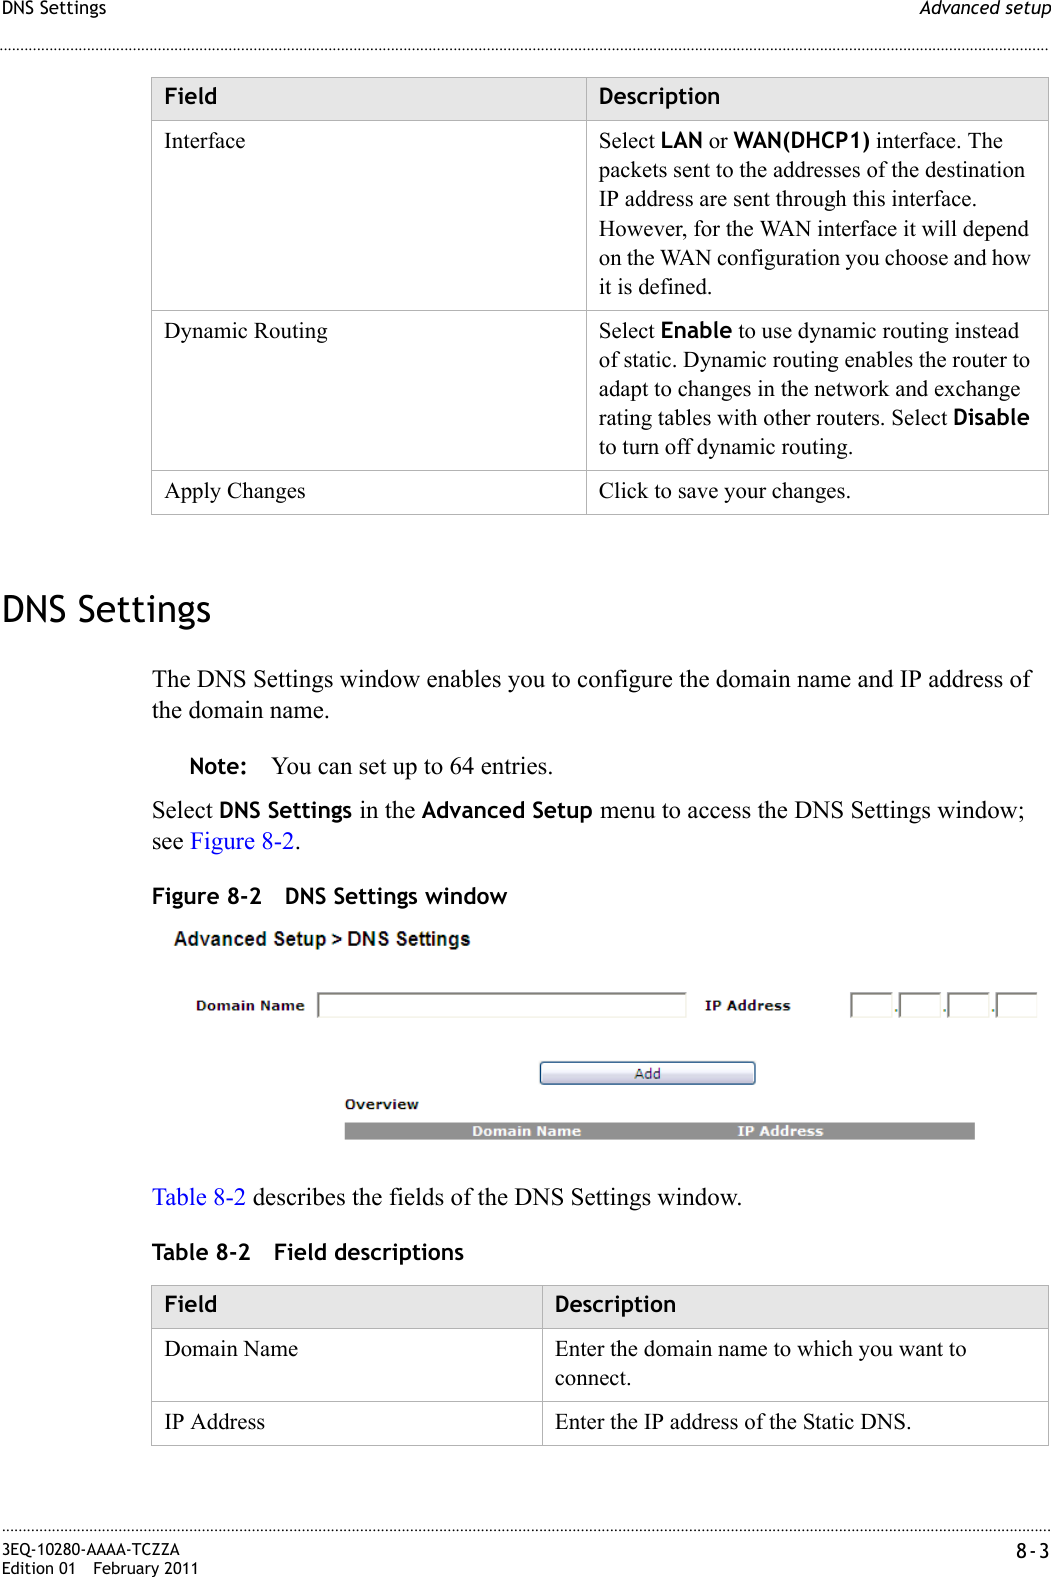 Advanced setupDNS Settings............................................................................................................................................................................................................................................................3EQ-10280-AAAA-TCZZAEdition 01 February 2011 8-3............................................................................................................................................................................................................................................................DNS SettingsThe DNS Settings window enables you to configure the domain name and IP address of the domain name.Note: You can set up to 64 entries.Select DNS Settings in the Advanced Setup menu to access the DNS Settings window; see Figure 8-2.Figure 8-2 DNS Settings windowTable 8-2 describes the fields of the DNS Settings window.Table 8-2 Field descriptionsInterface Select LAN or WAN(DHCP1) interface. The packets sent to the addresses of the destination IP address are sent through this interface. However, for the WAN interface it will depend on the WAN configuration you choose and how it is defined.Dynamic Routing Select Enable to use dynamic routing instead of static. Dynamic routing enables the router to adapt to changes in the network and exchange rating tables with other routers. Select Disable to turn off dynamic routing.Apply Changes Click to save your changes.Field DescriptionField DescriptionDomain Name Enter the domain name to which you want to connect.IP Address Enter the IP address of the Static DNS.